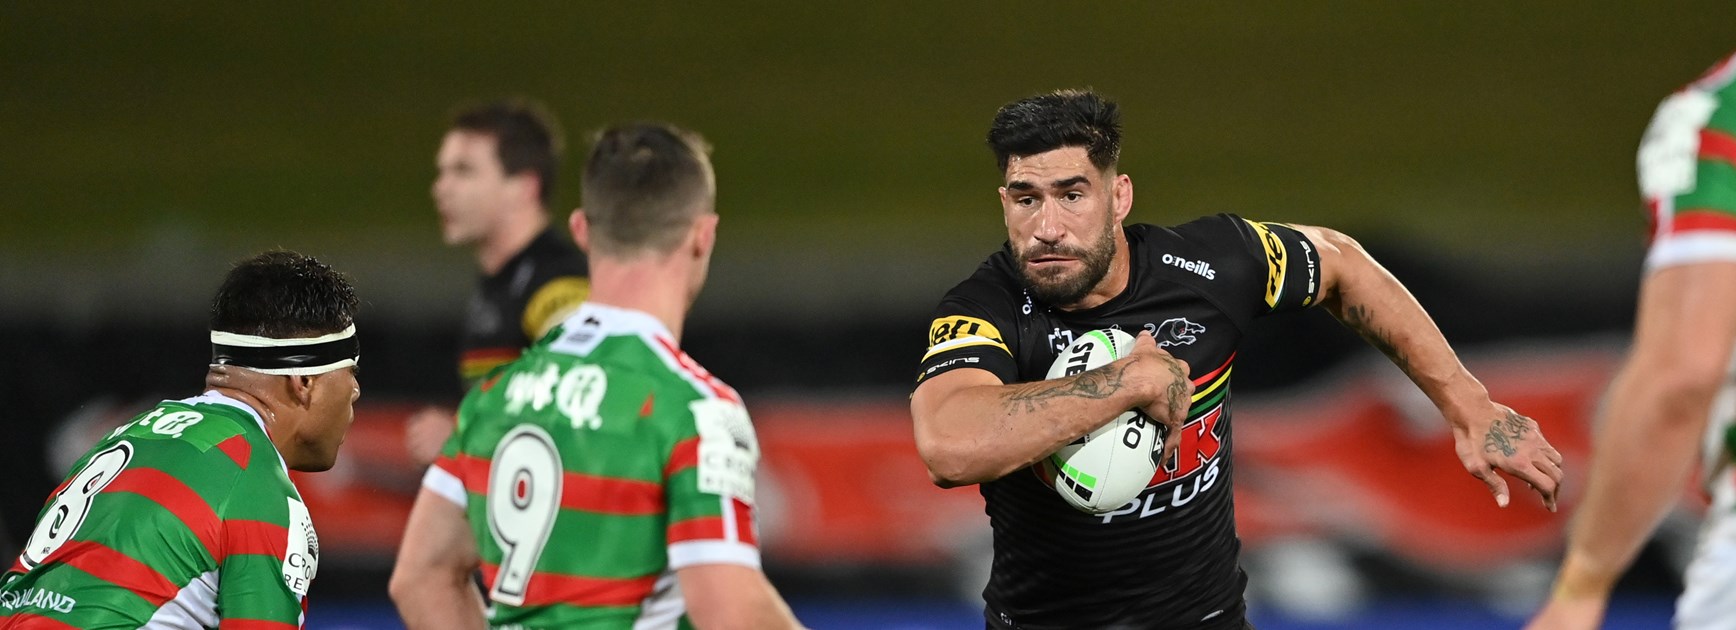 Results top priority but youthful side makes Tamou eager for new deal